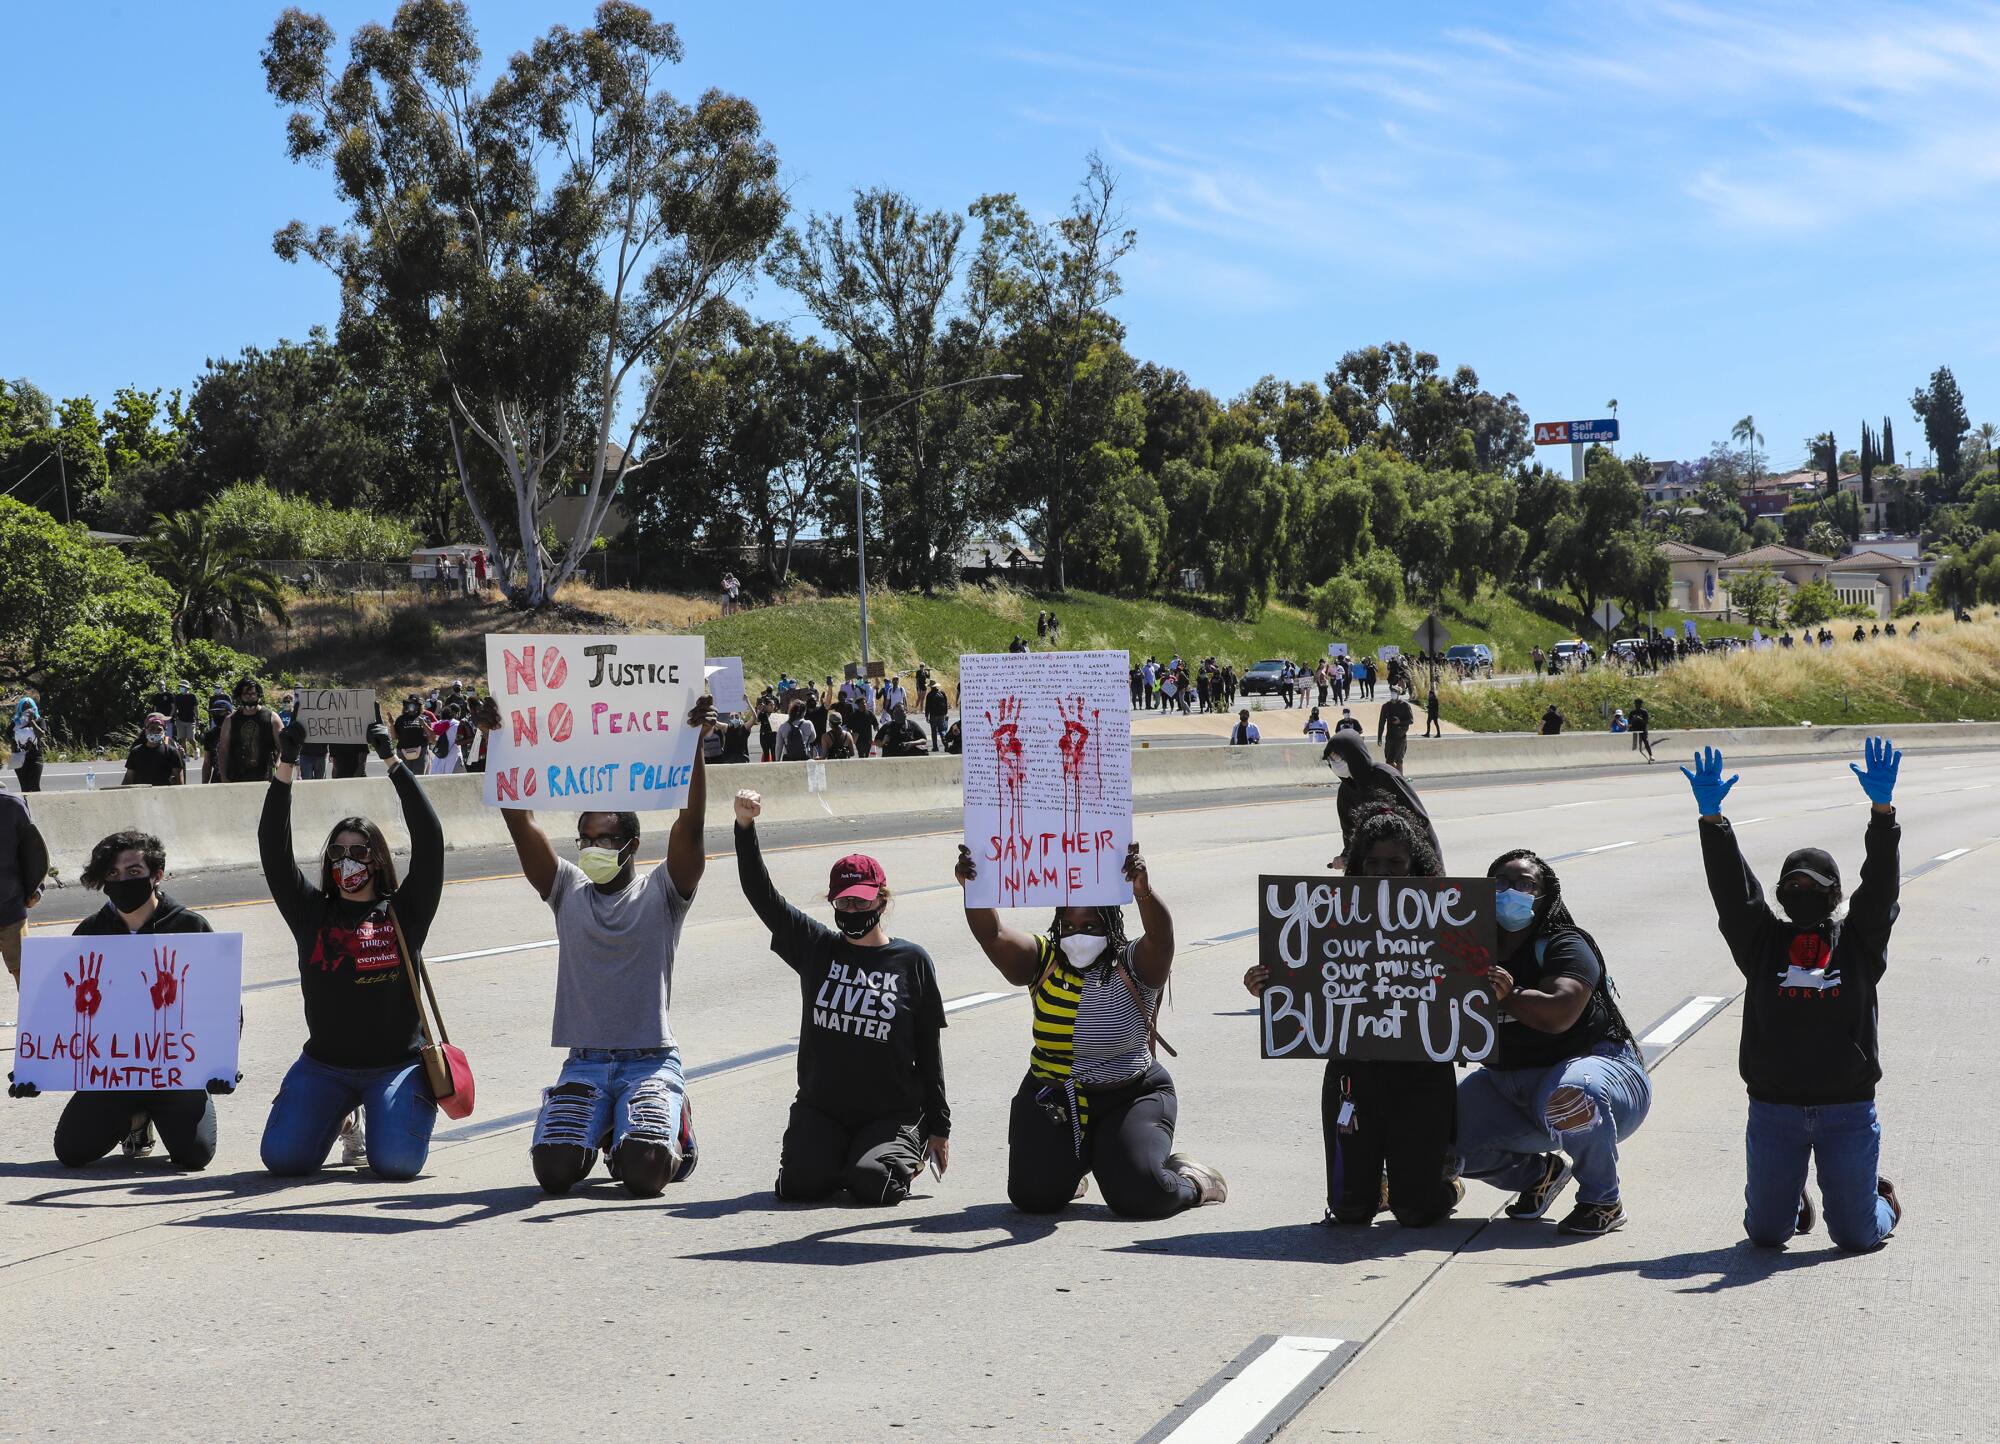 Protestors in support of calling for justice for George Floyd temporary blocked the westbound freeway lanes on Interstate 8 during a protest in La Mesa on Saturday.